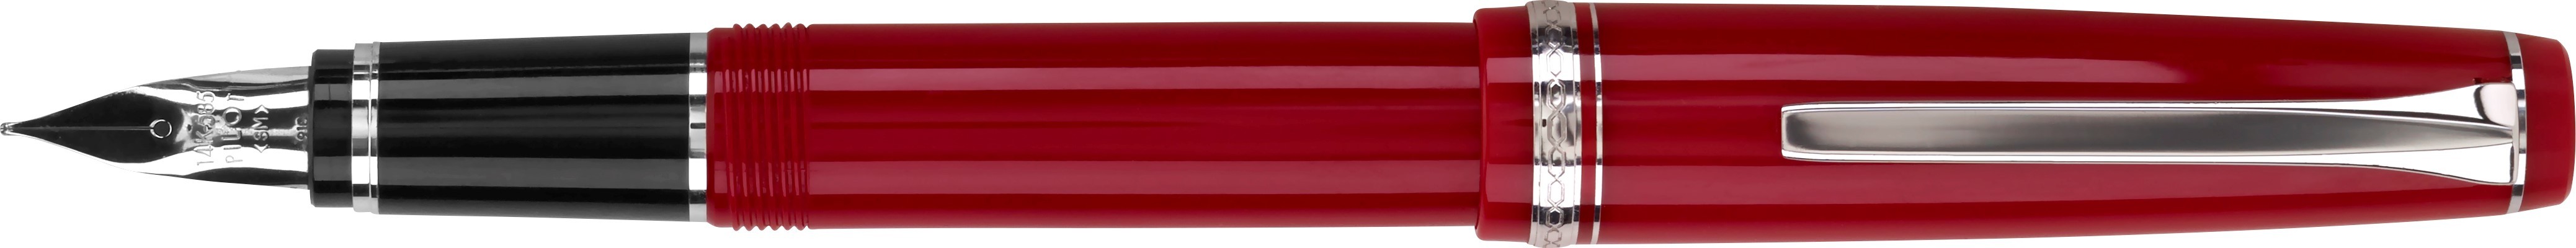 Pilot Falcon Red with Rhodium Plated Trim Fountain Pen